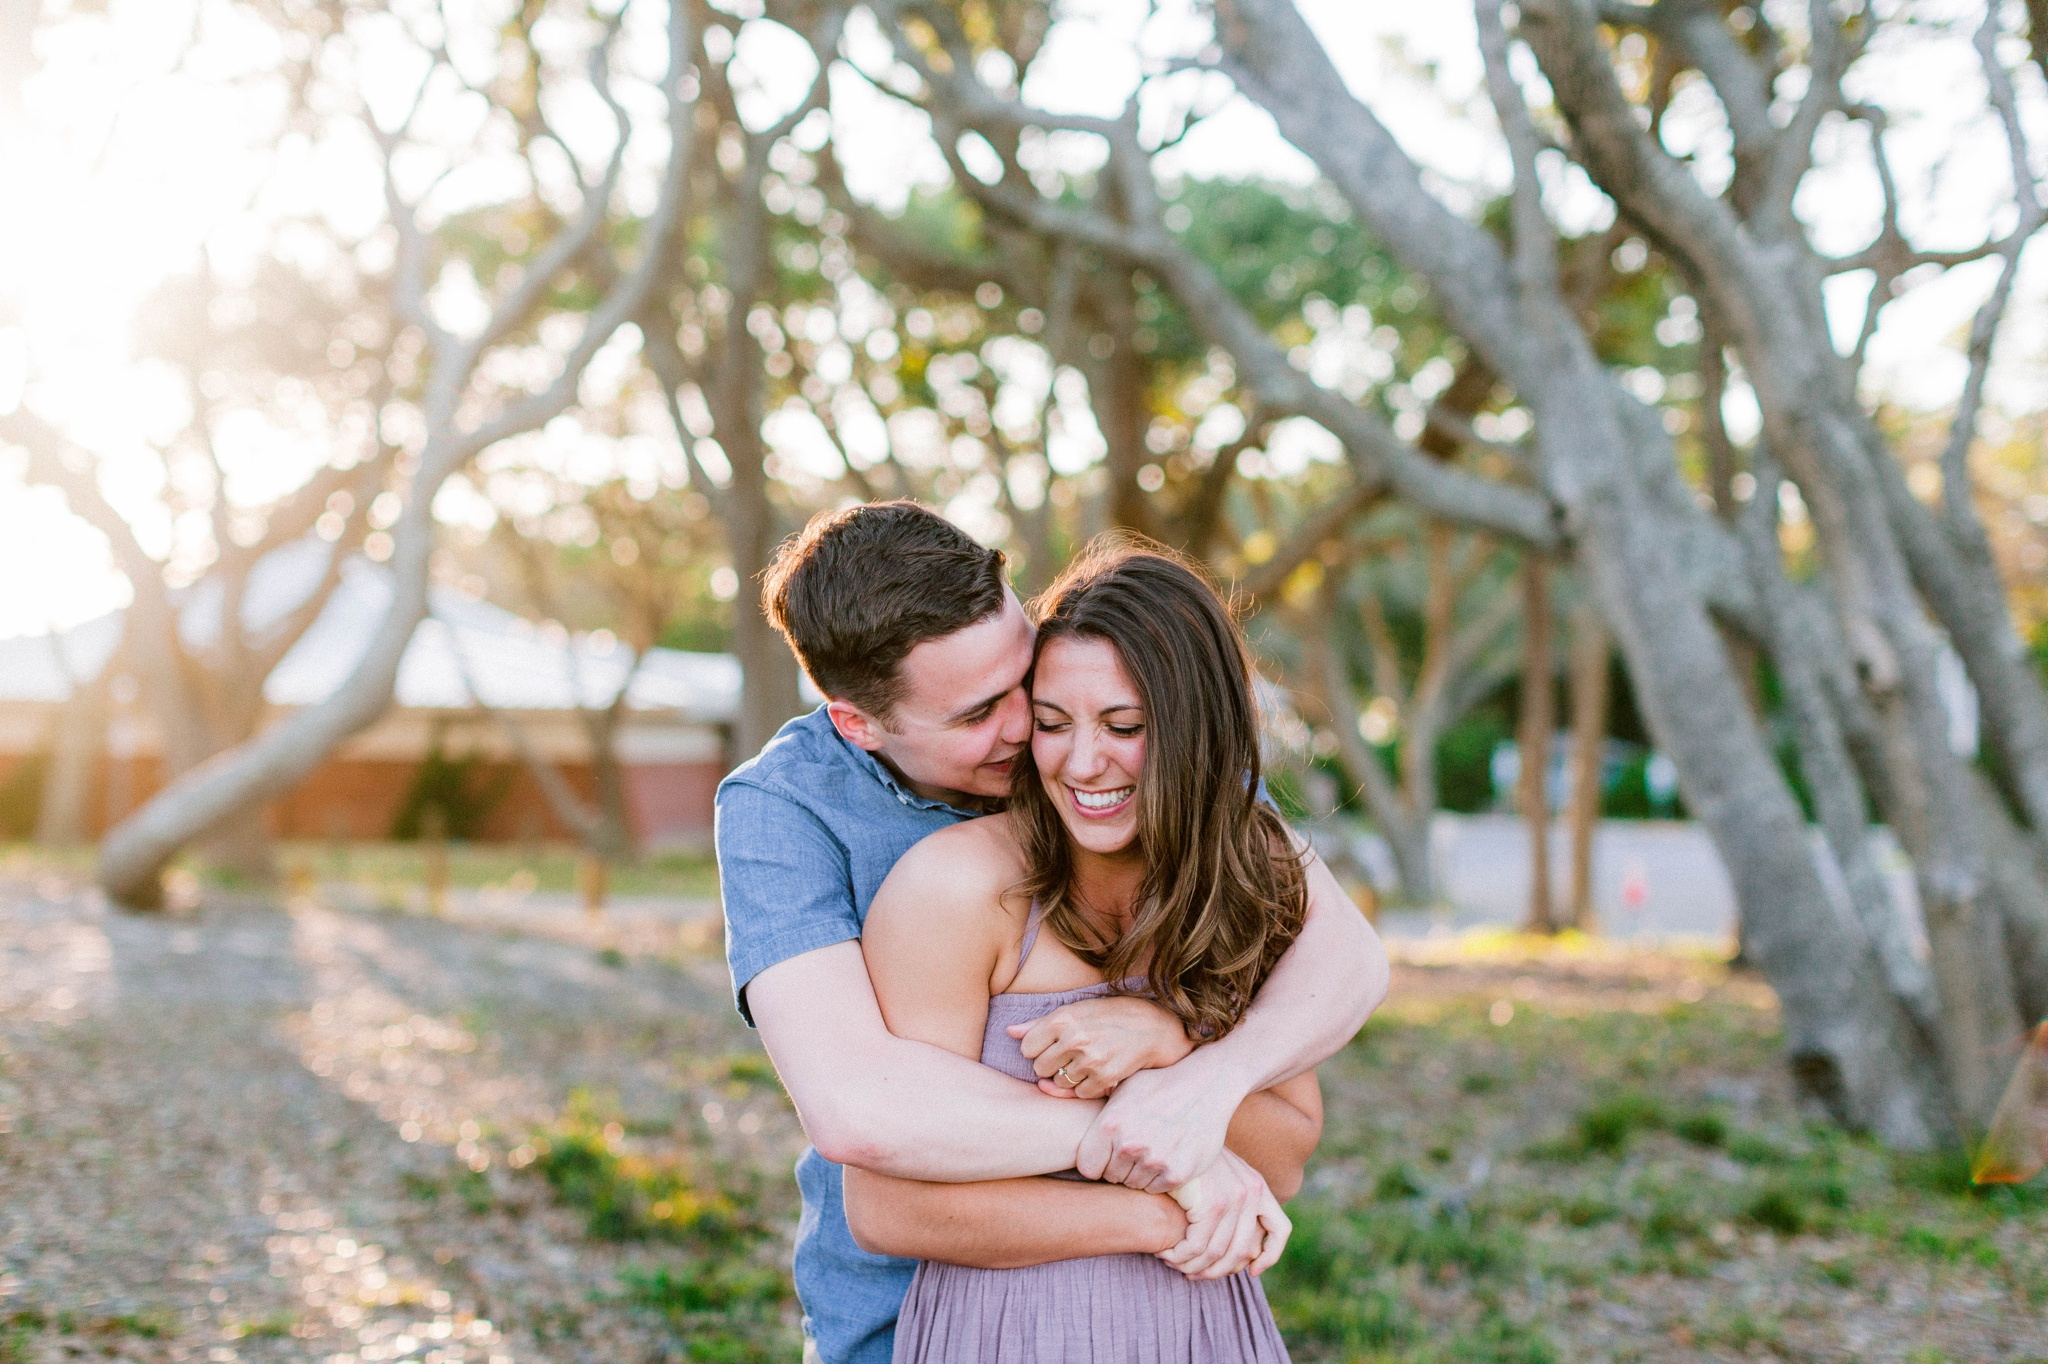  Guy kissing a girl in front of live oak trees with the sunset behind them - Woman is in a flowy pastel maxi dress - outdoor golden light session - engagement photographer in honolulu, oahu, hawaii - johanna dye photography 